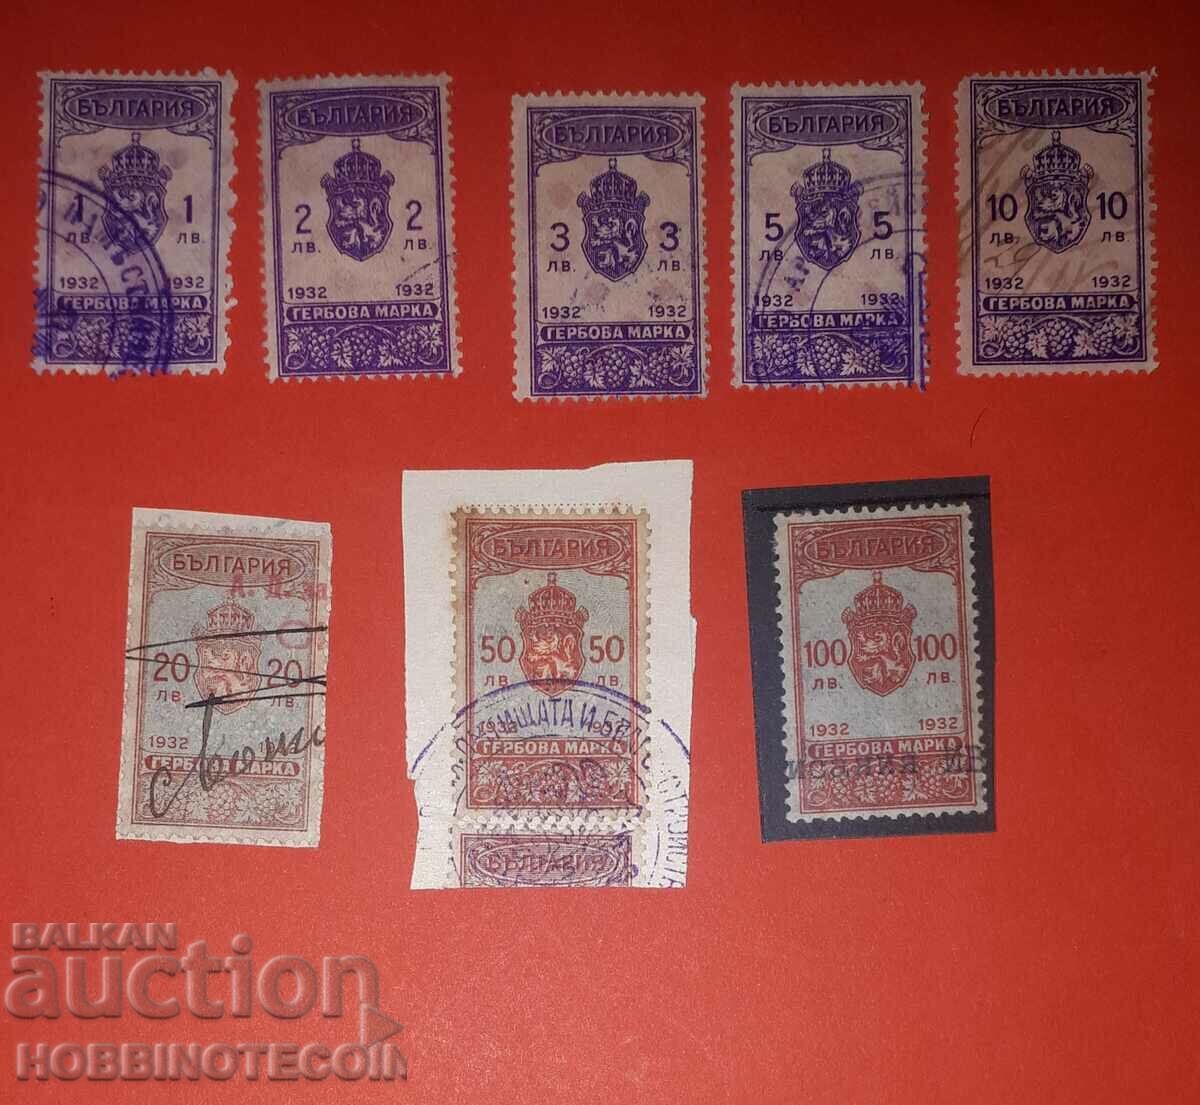 BULGARIA TIMBRIE TIMBRIE TIMBRIE 1 - 100 BGN 1932